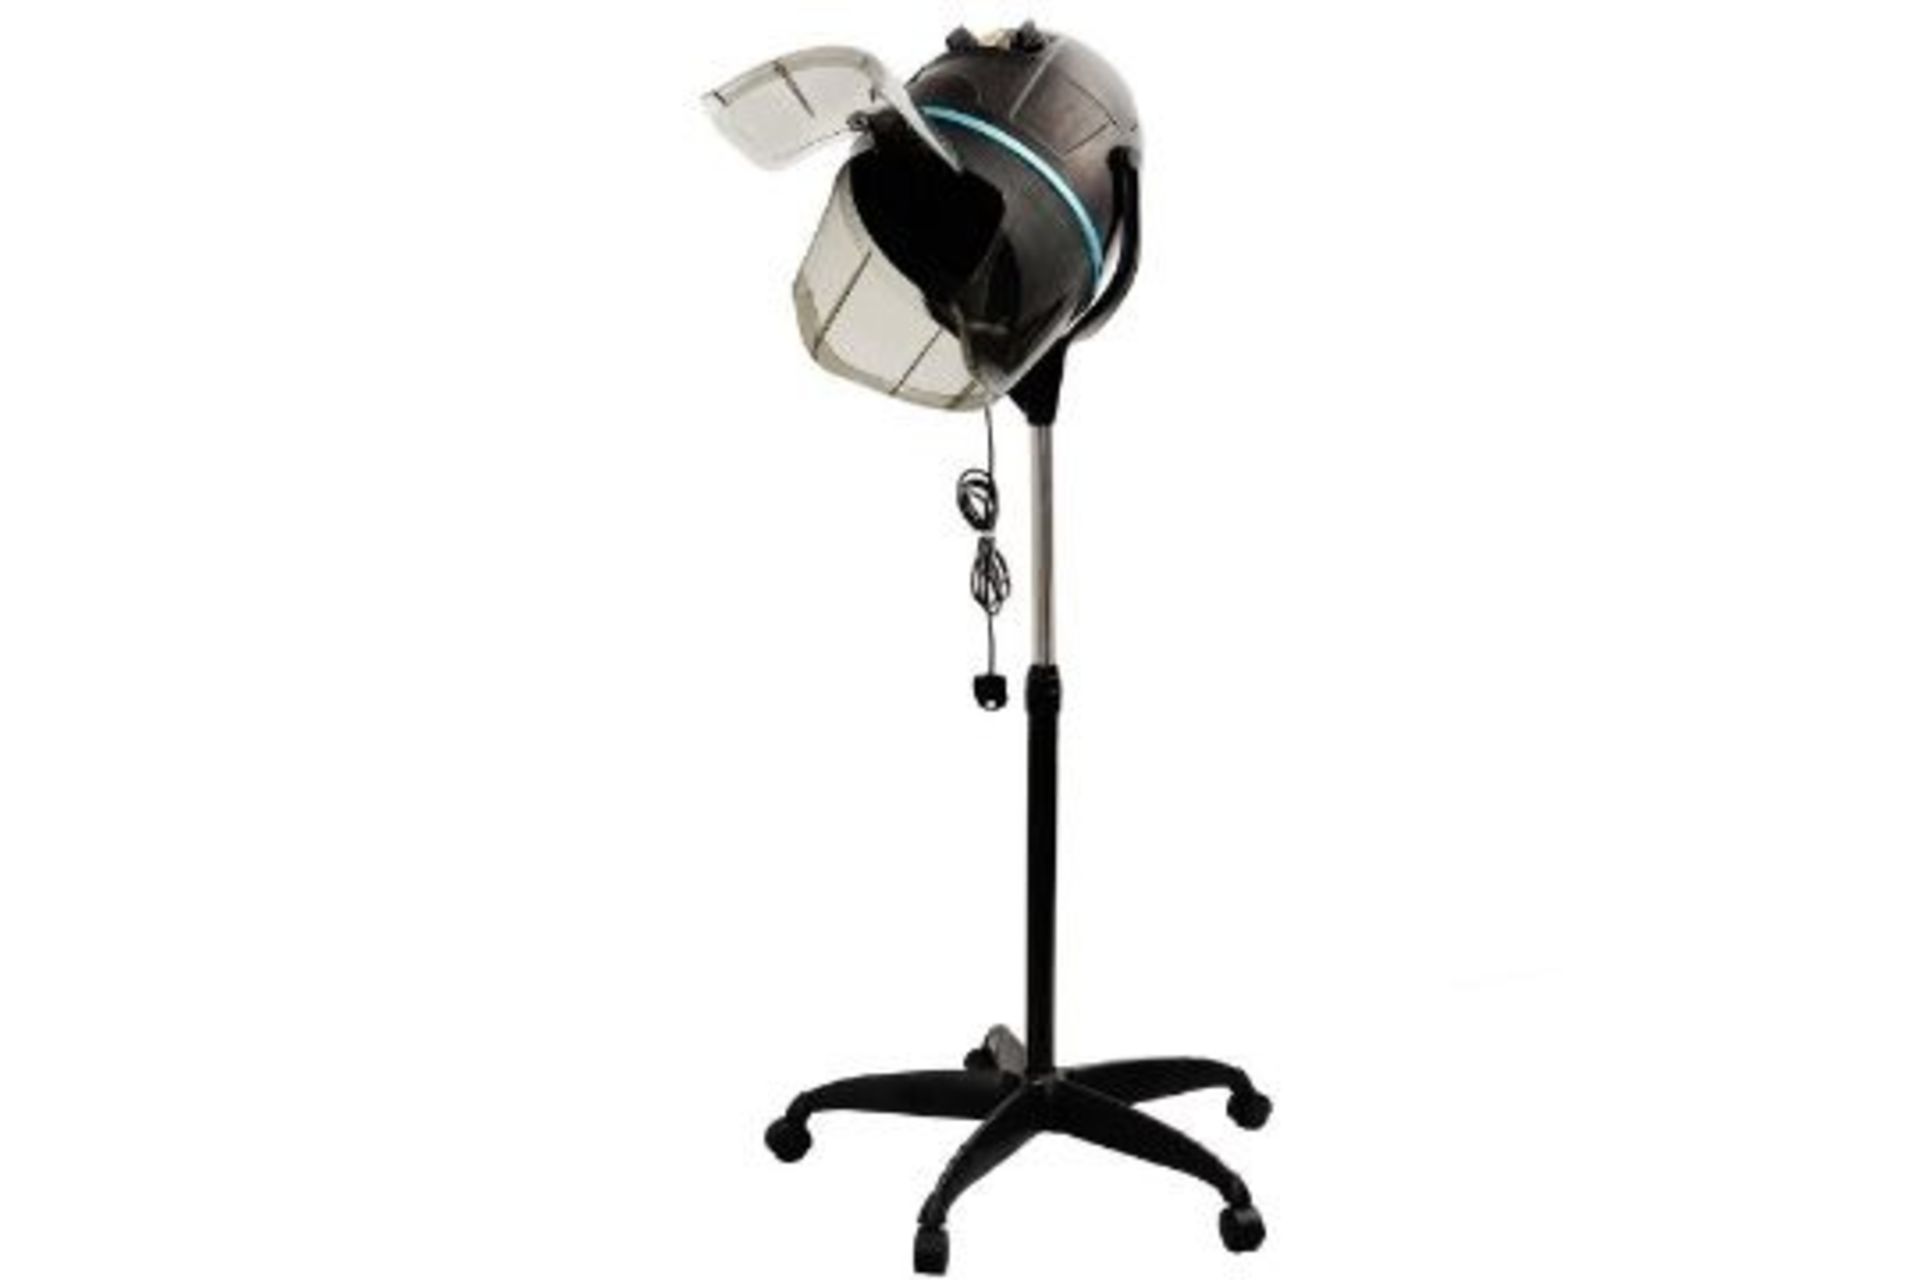 Portable Salon Hood Hairdryer with Stand (ER35)